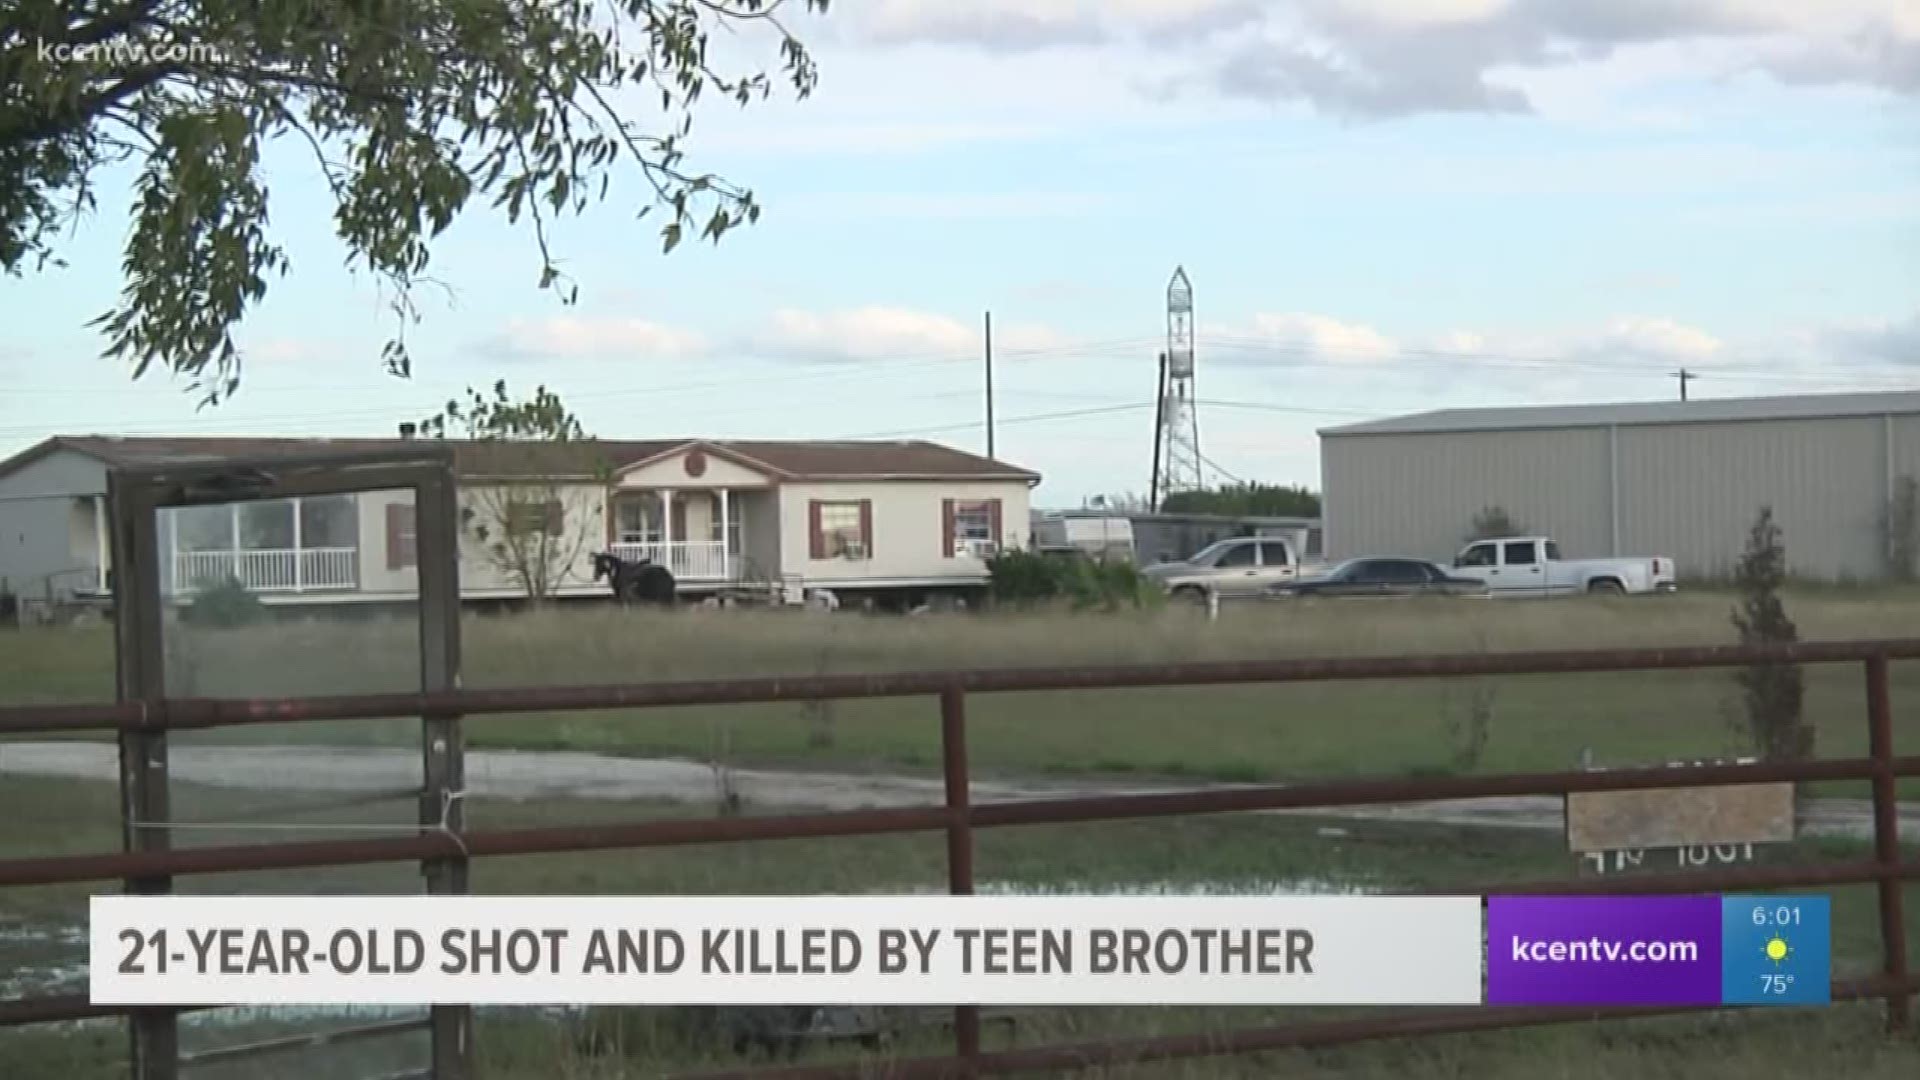 A 17-year-old fatally shot his 21-year-old brother in the chest Saturday.